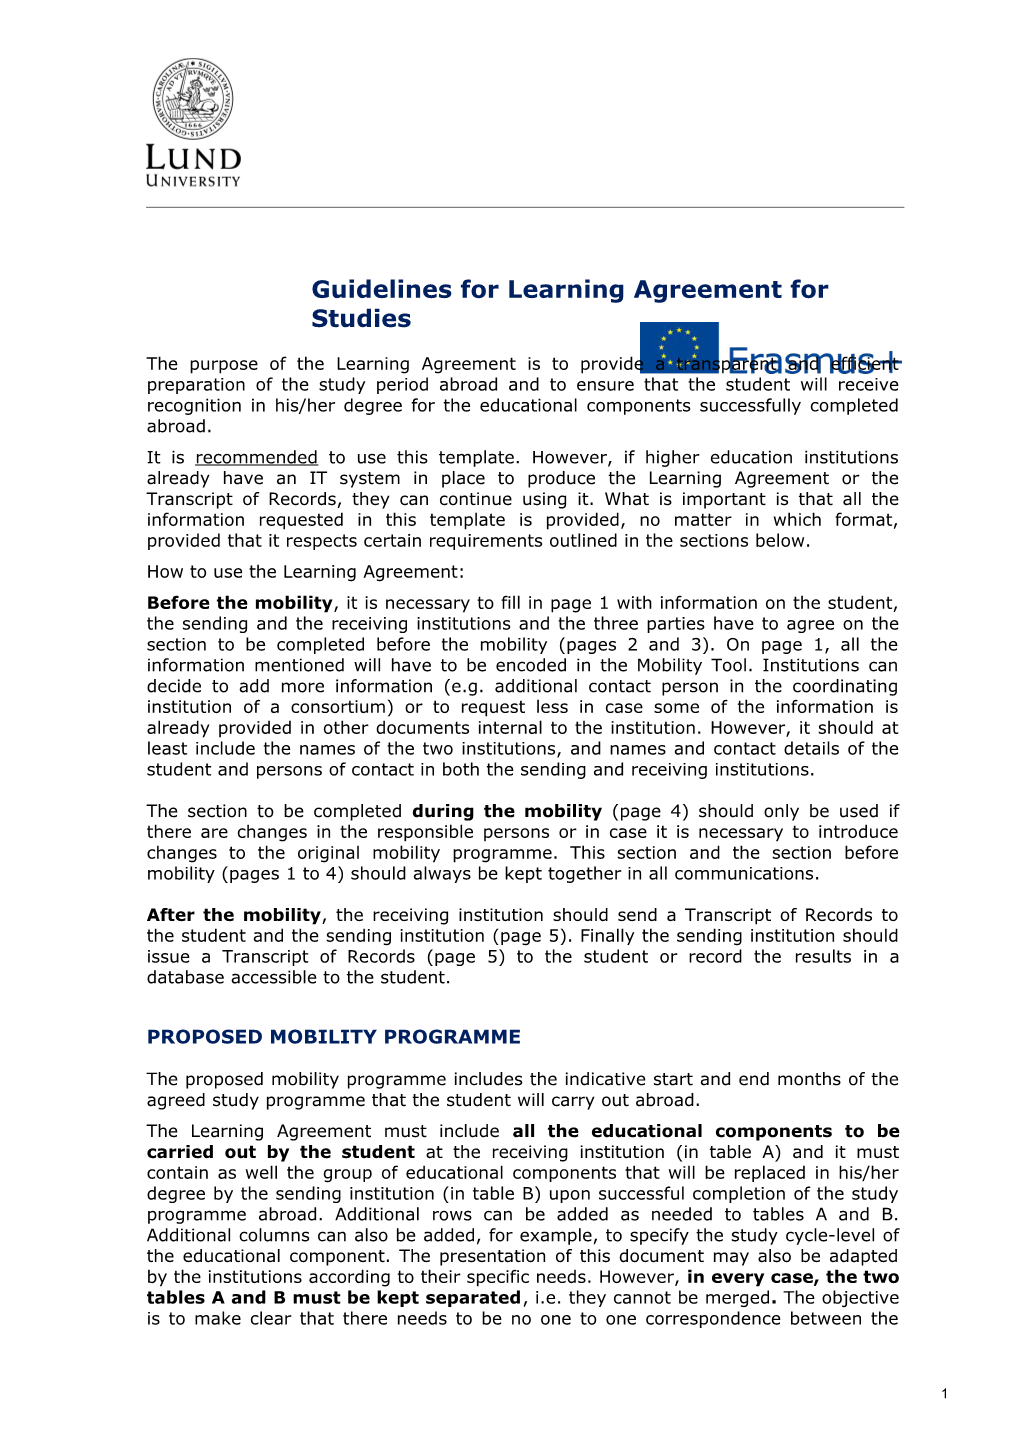 Guidelines for Learning Agreement for Studies